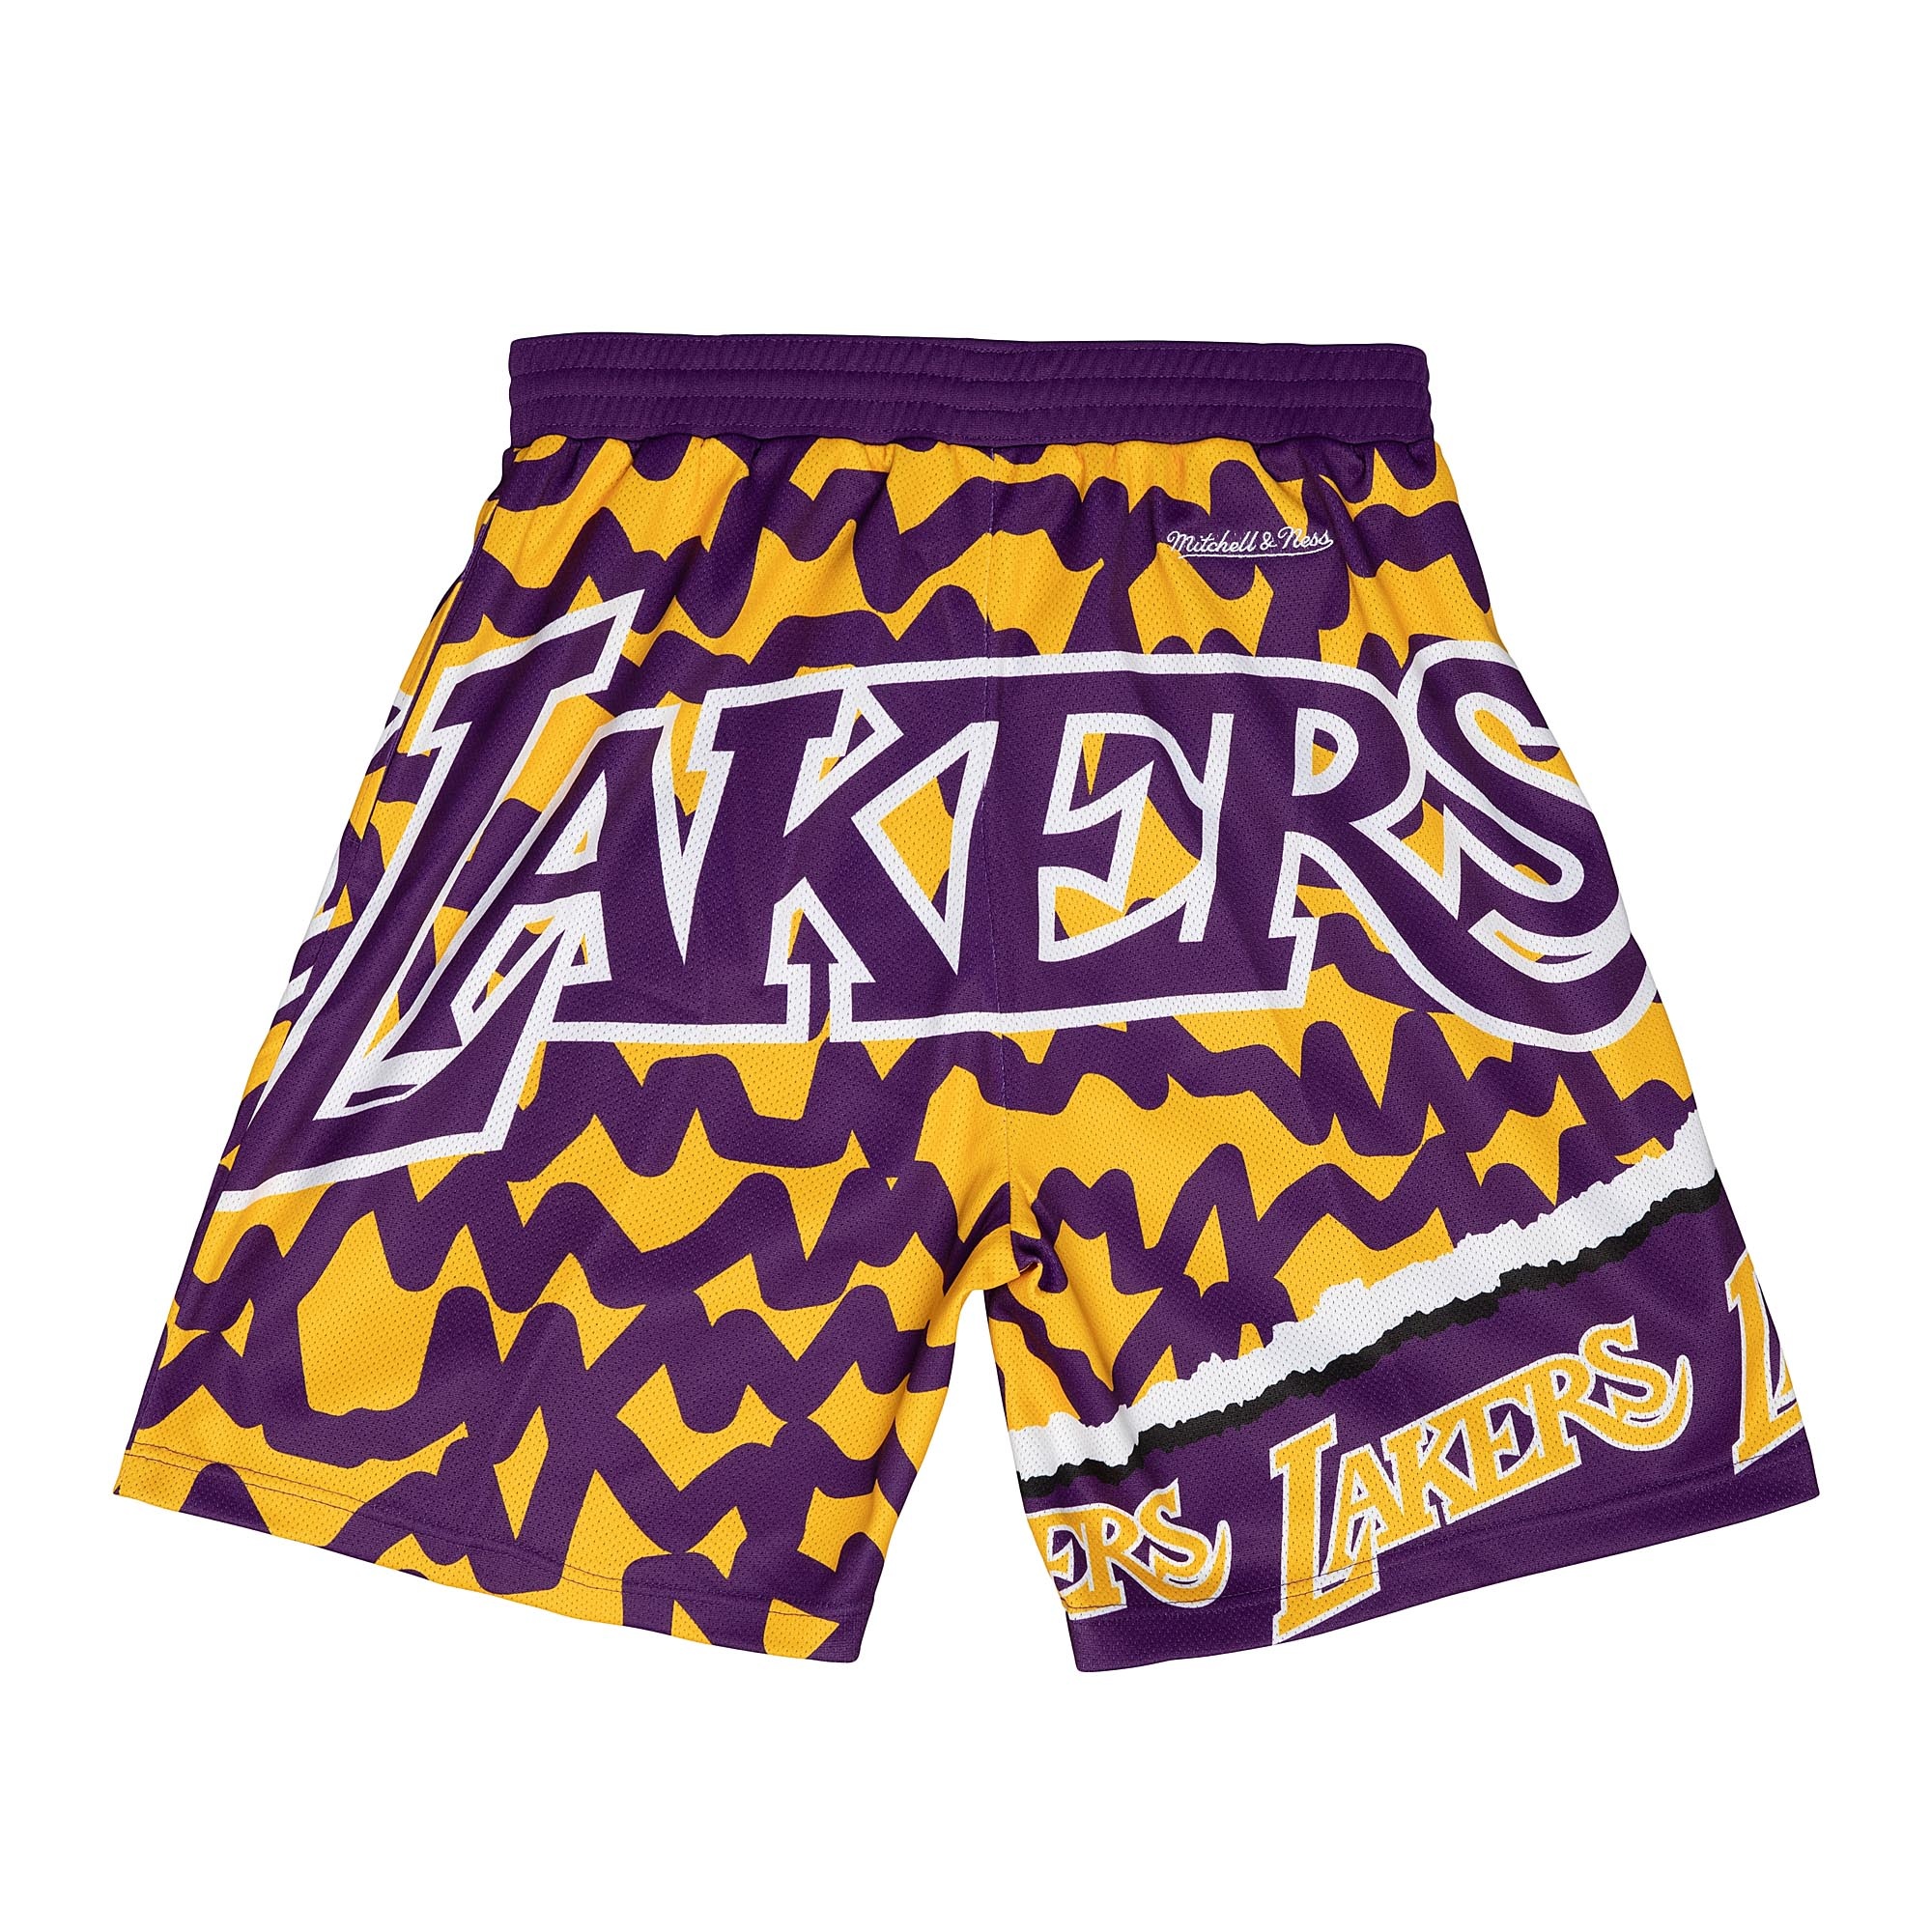 Mitchell & Ness Men's Big Face 2.0 Los Angeles Lakers Shorts